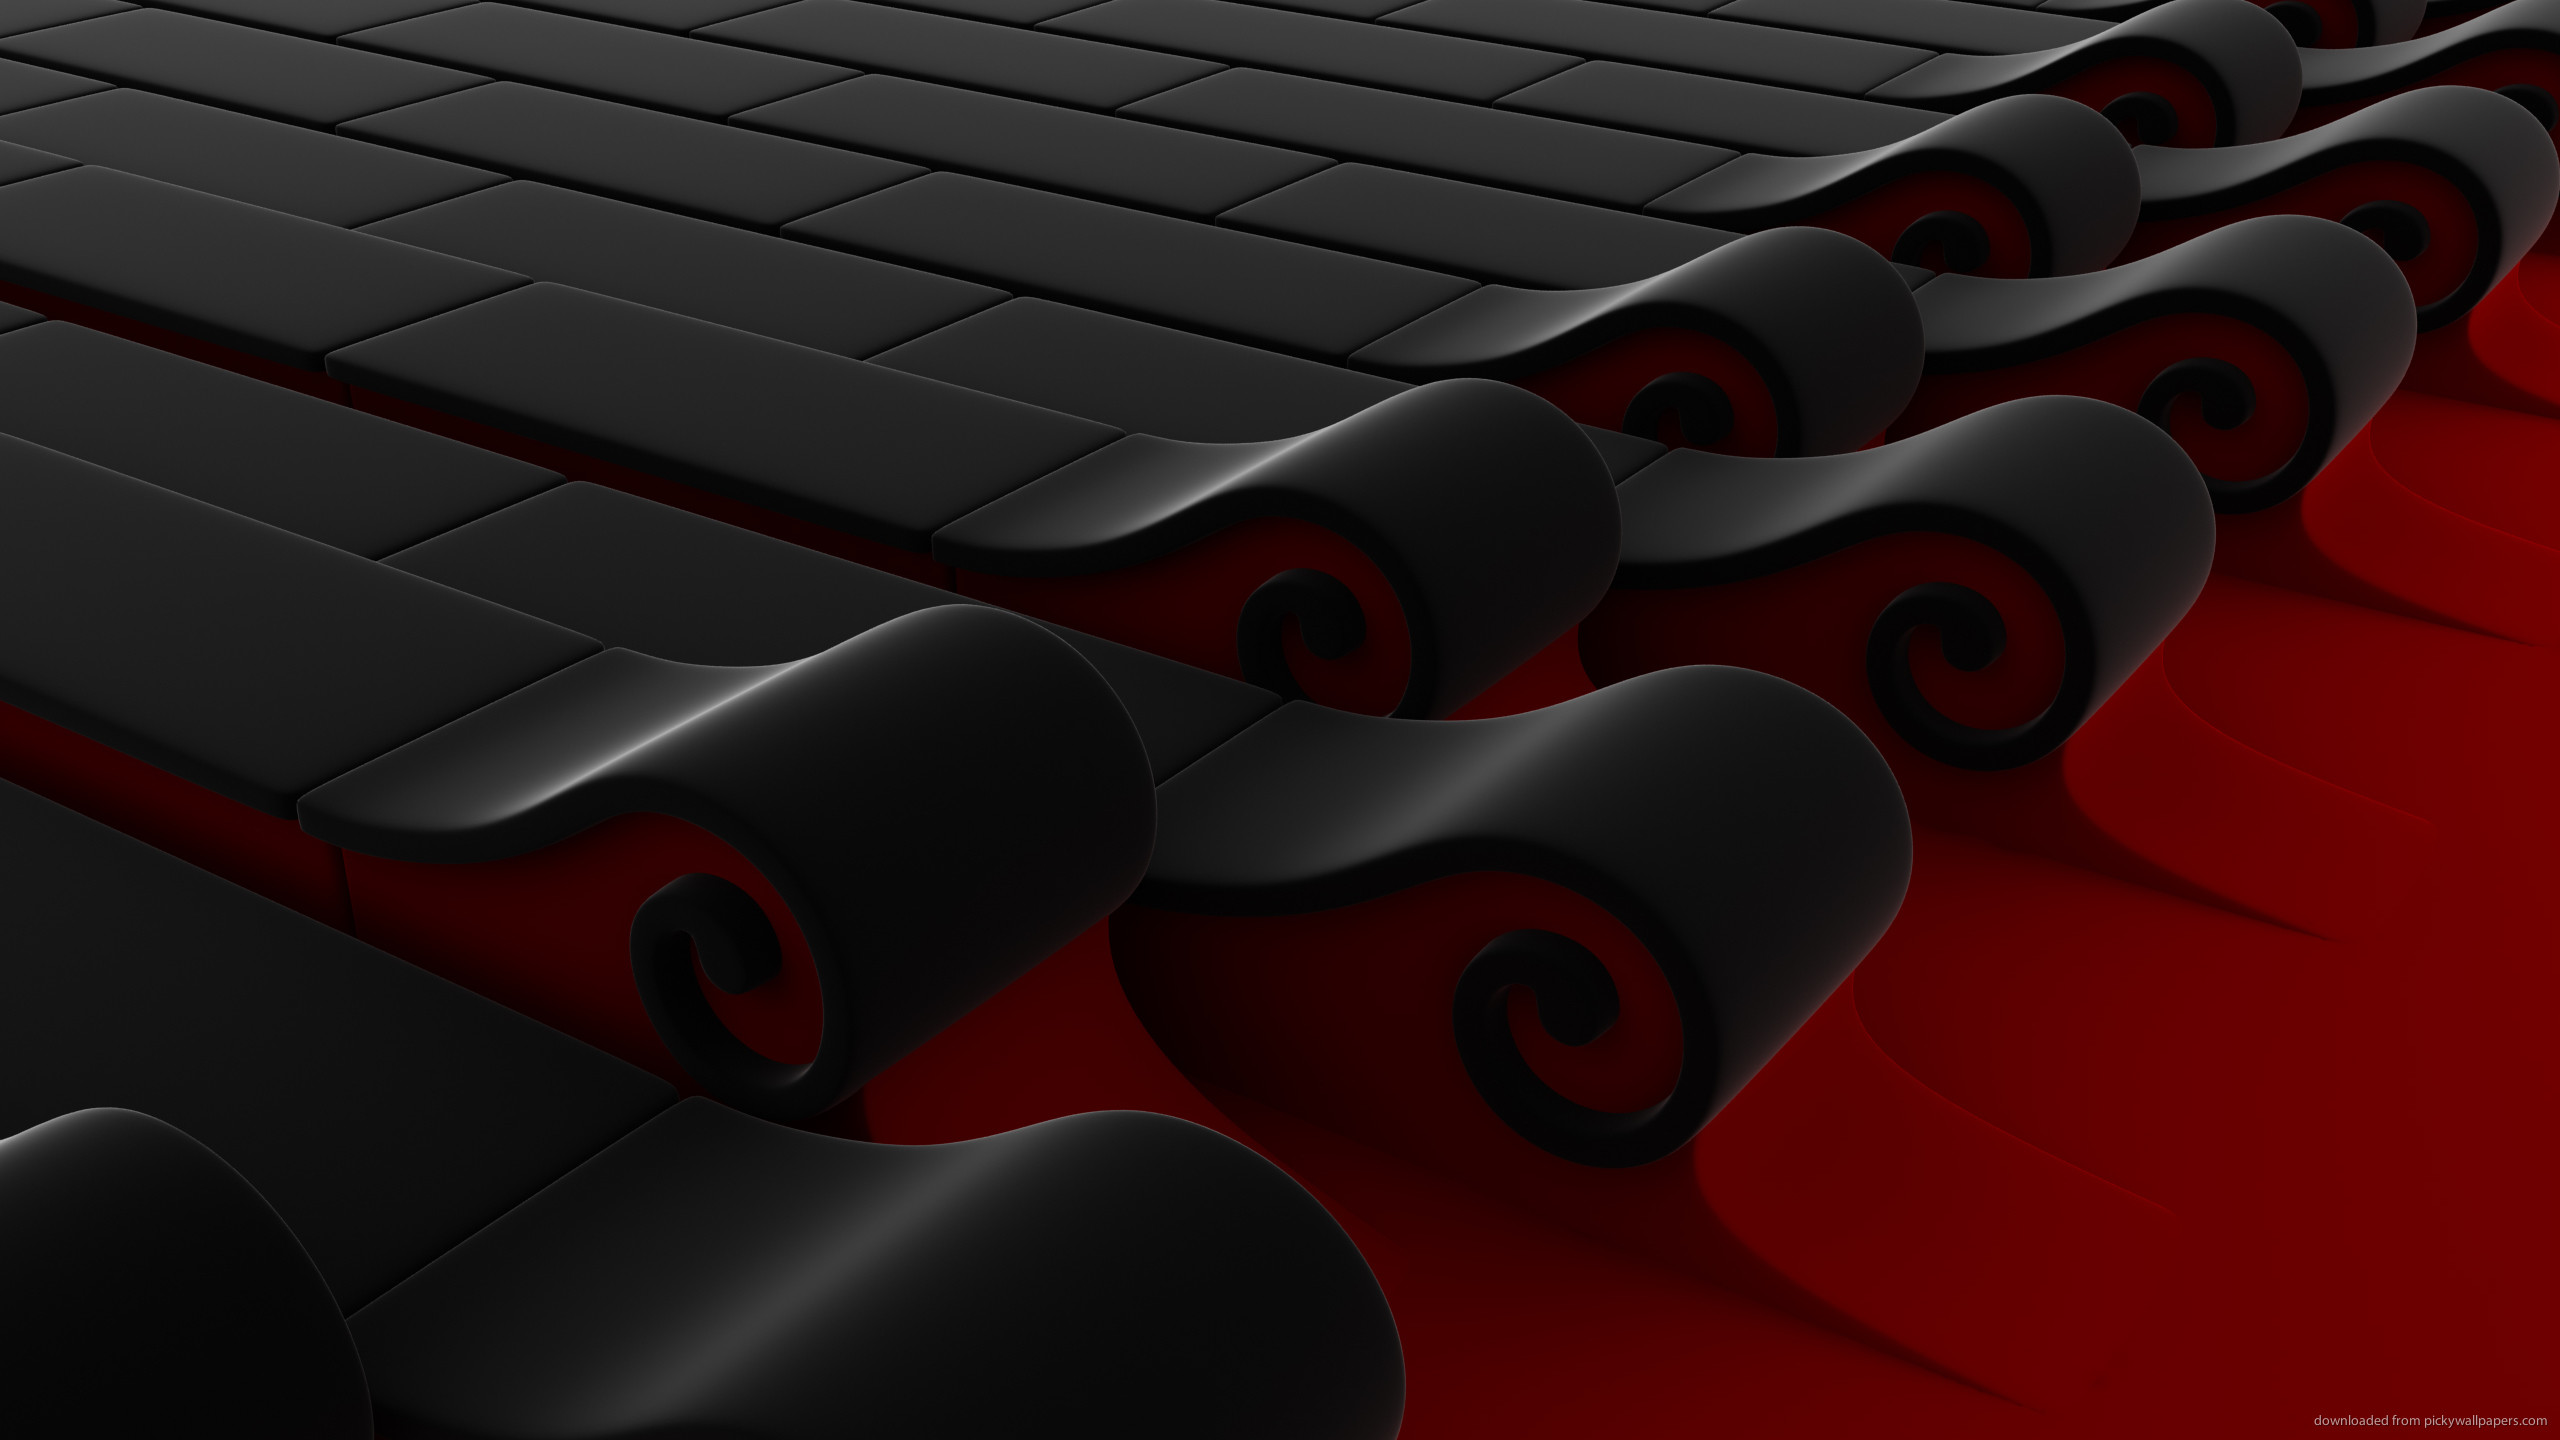 Black and Red Waves render for 2560×1440